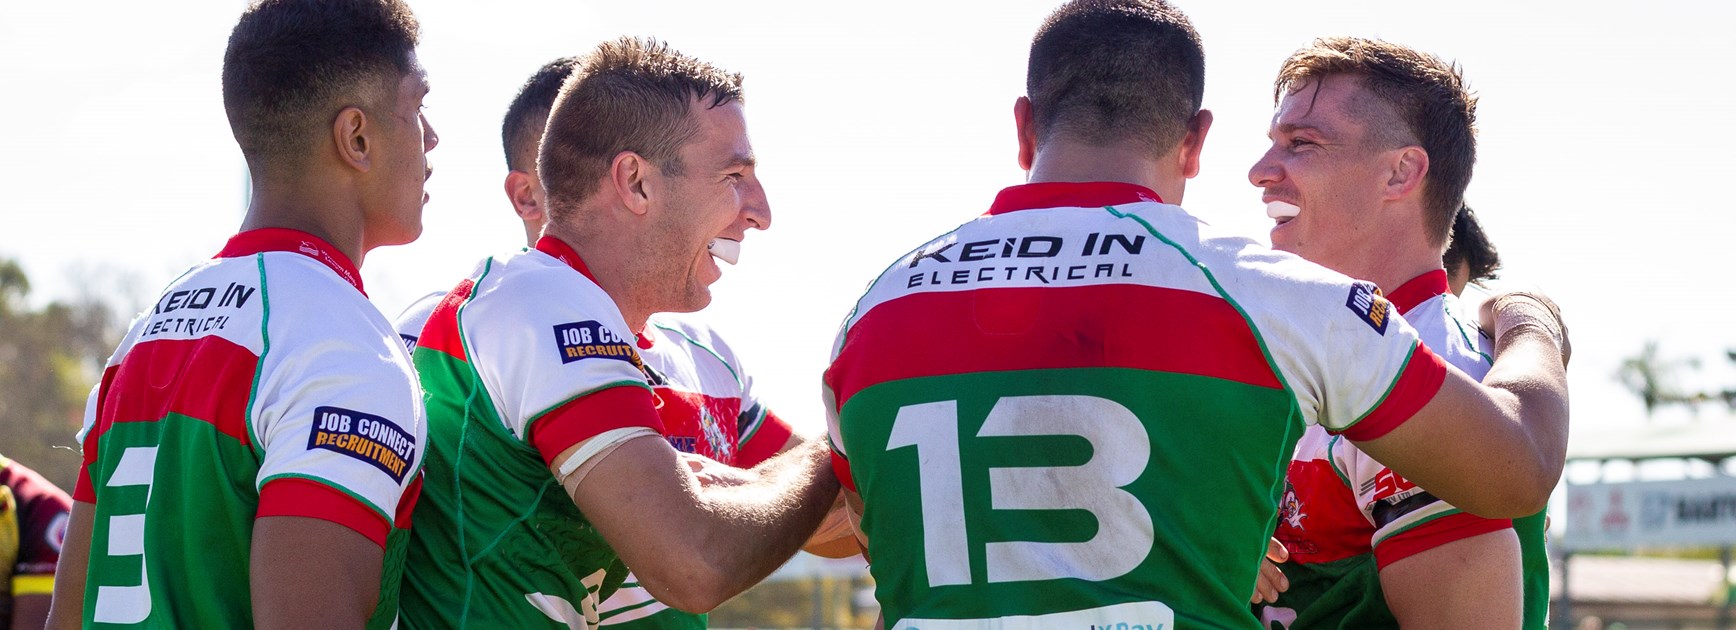 Geno and King Wally lift Wynnum with inspirational speech